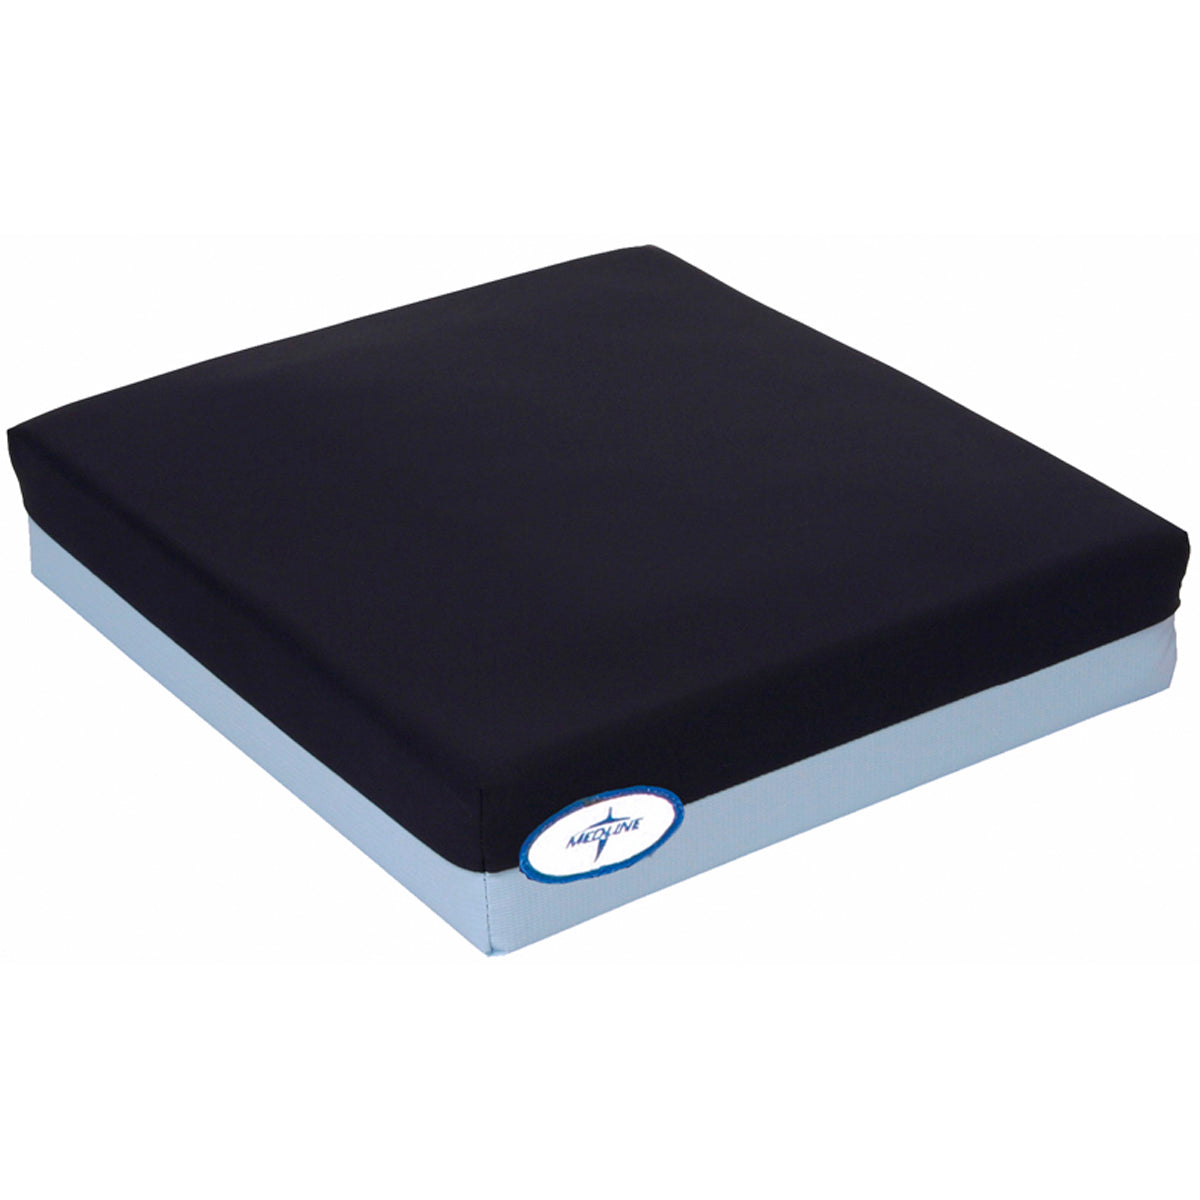 Memory foam seat cushion • Compare best prices now »